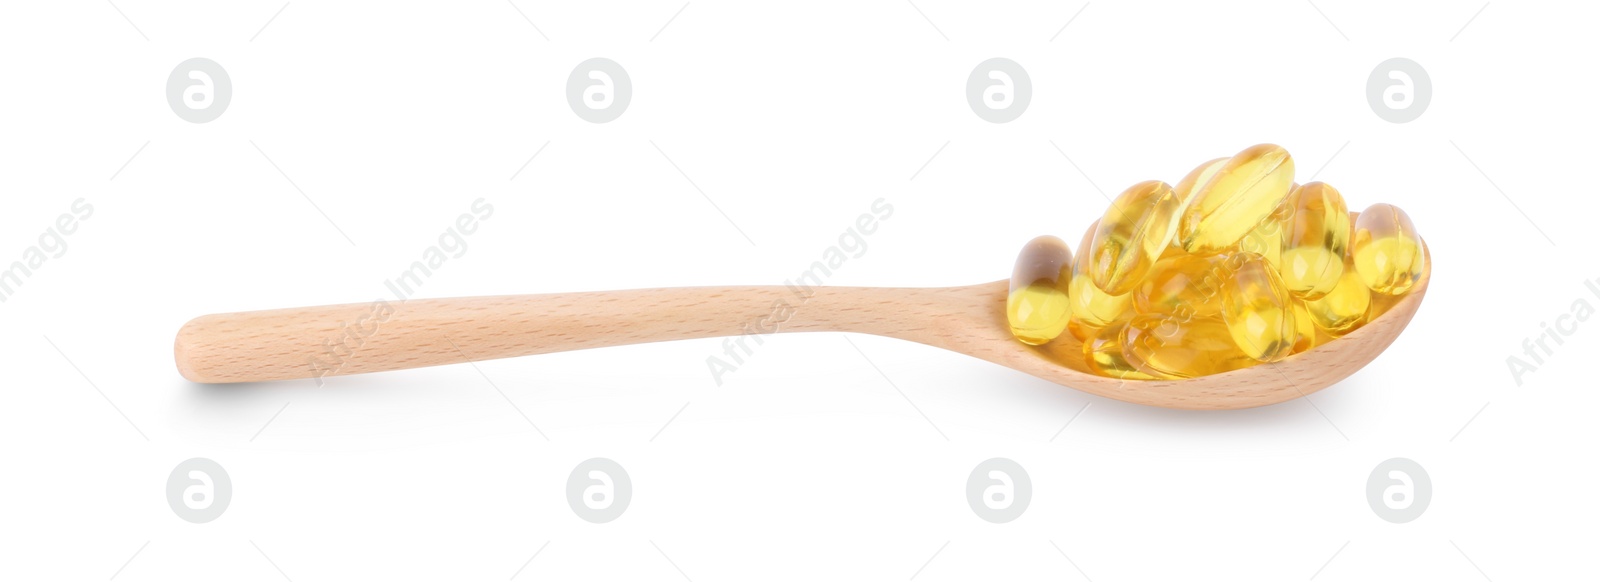 Photo of Vitamin capsules in wooden spoon isolated on white